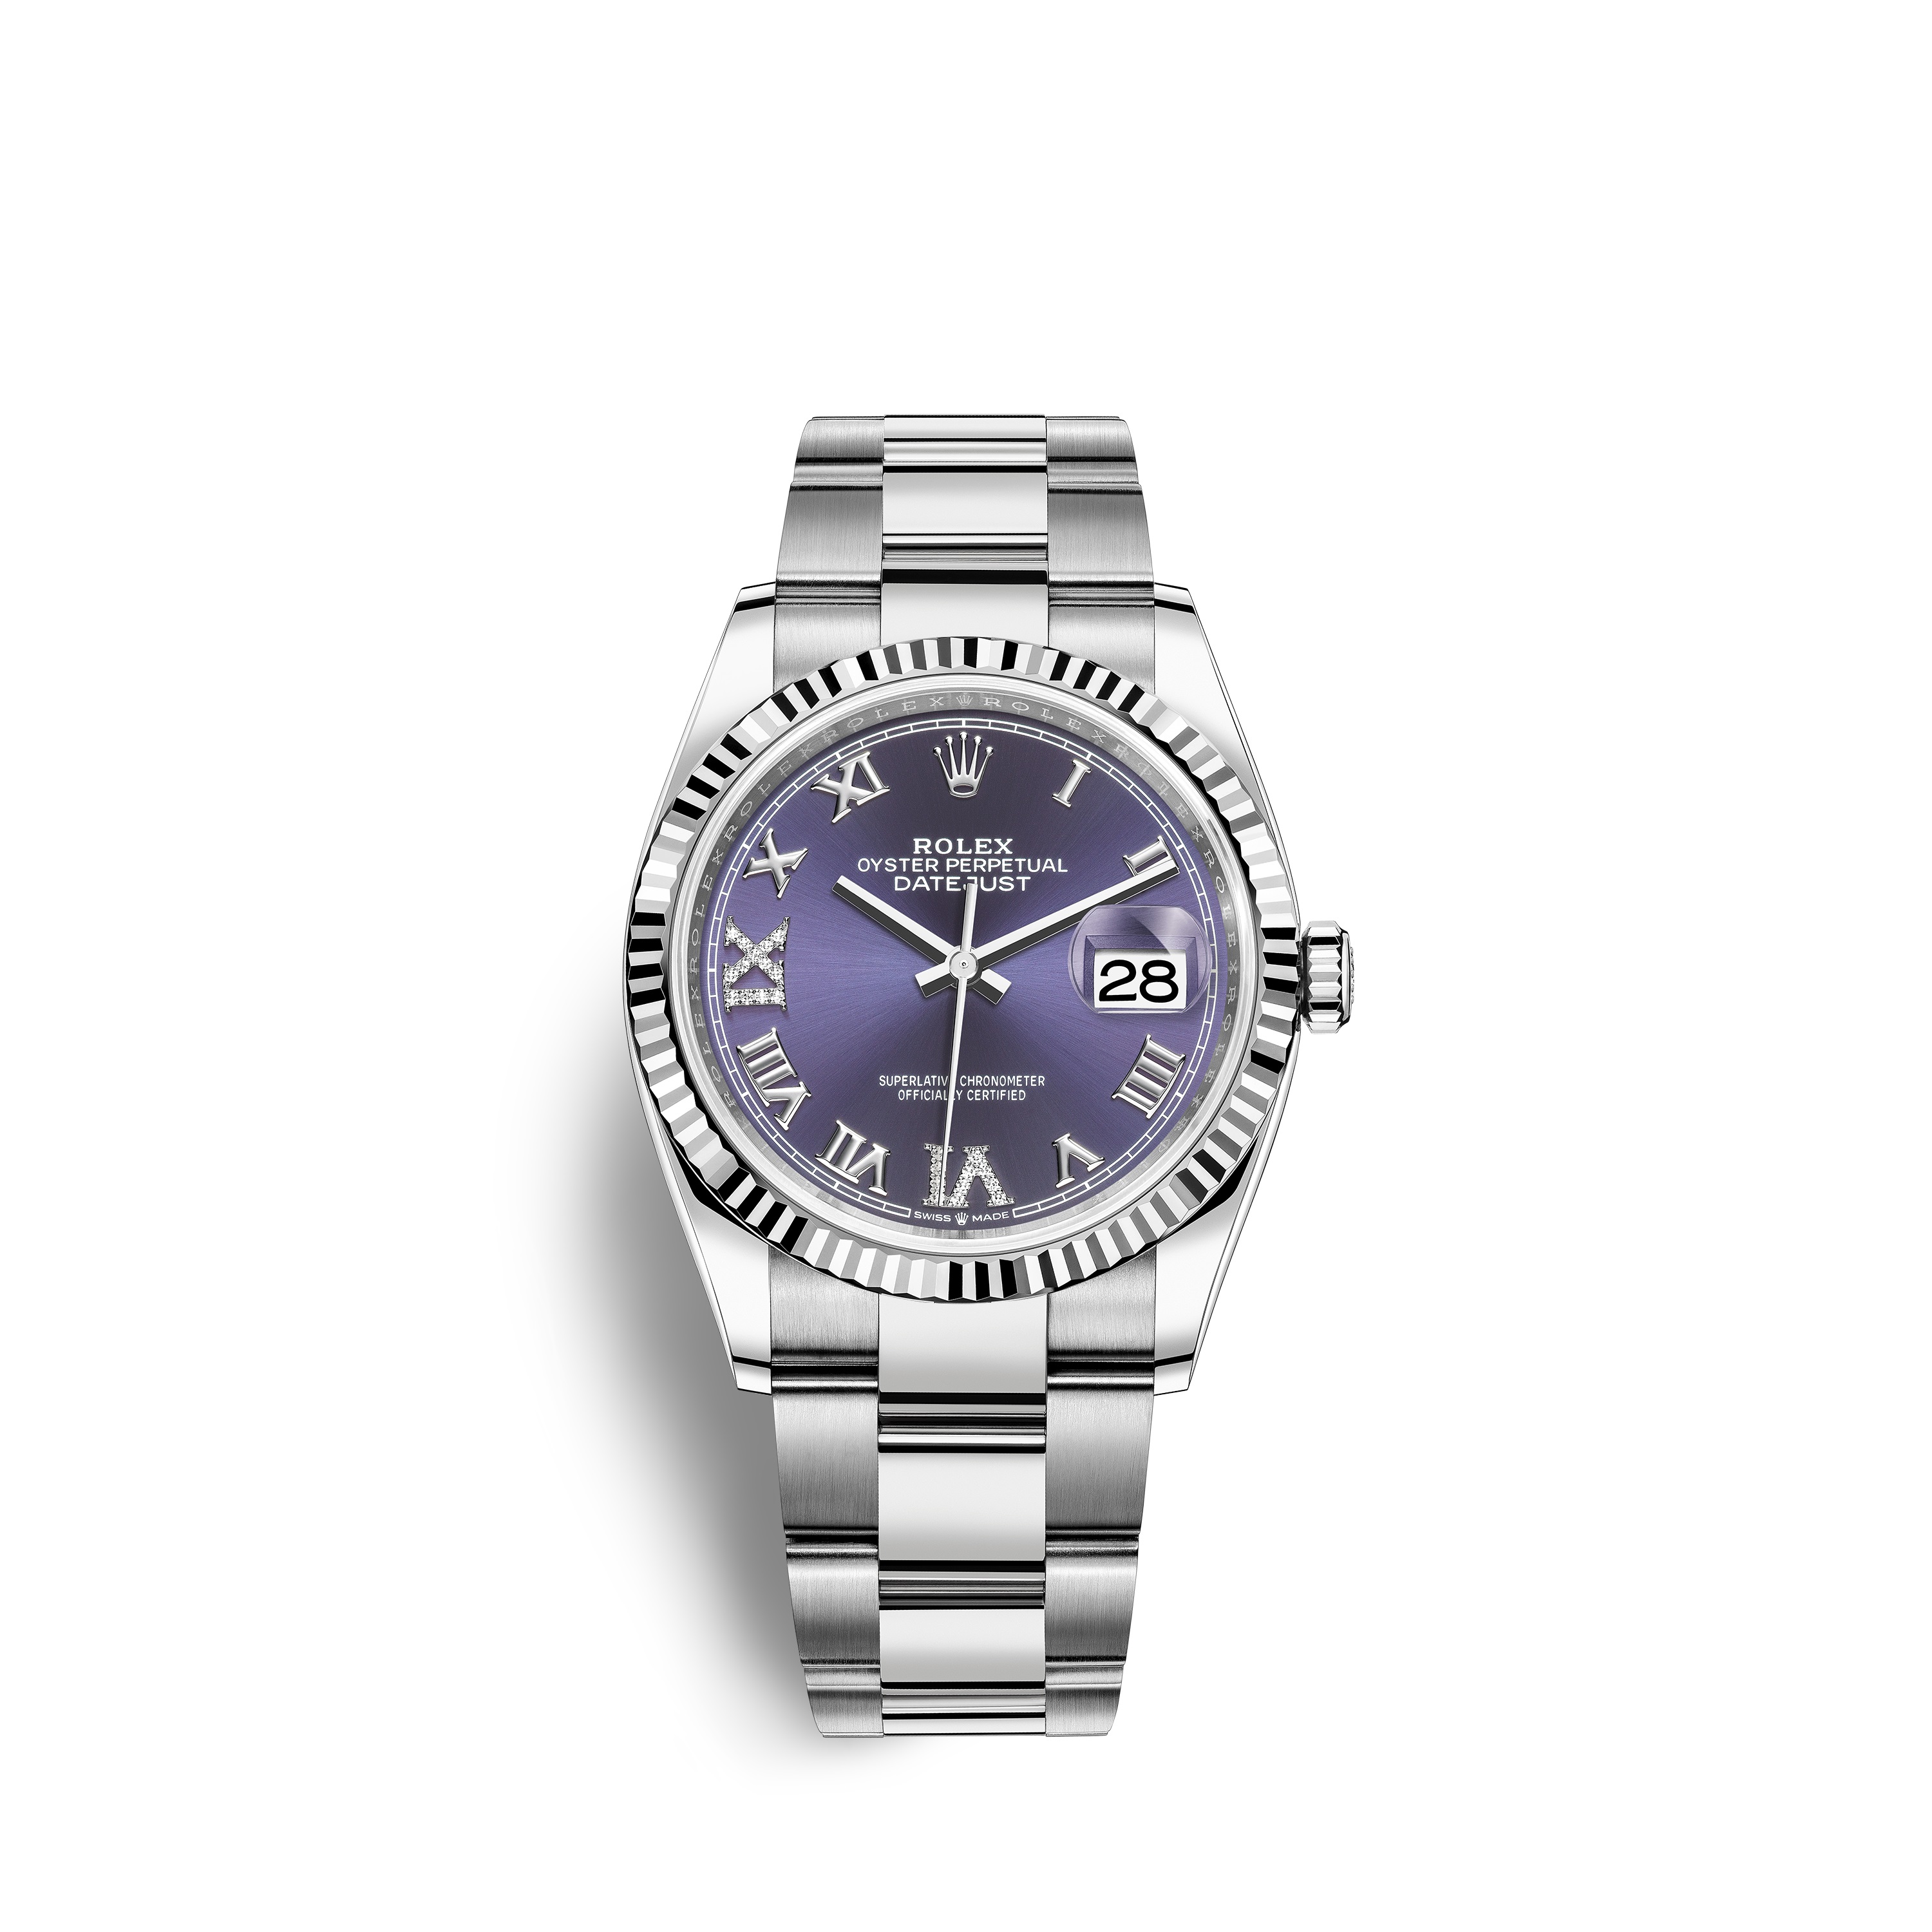 Datejust 36 126234 White Gold & Stainless Steel Watch (Aubergine Set with Diamonds)